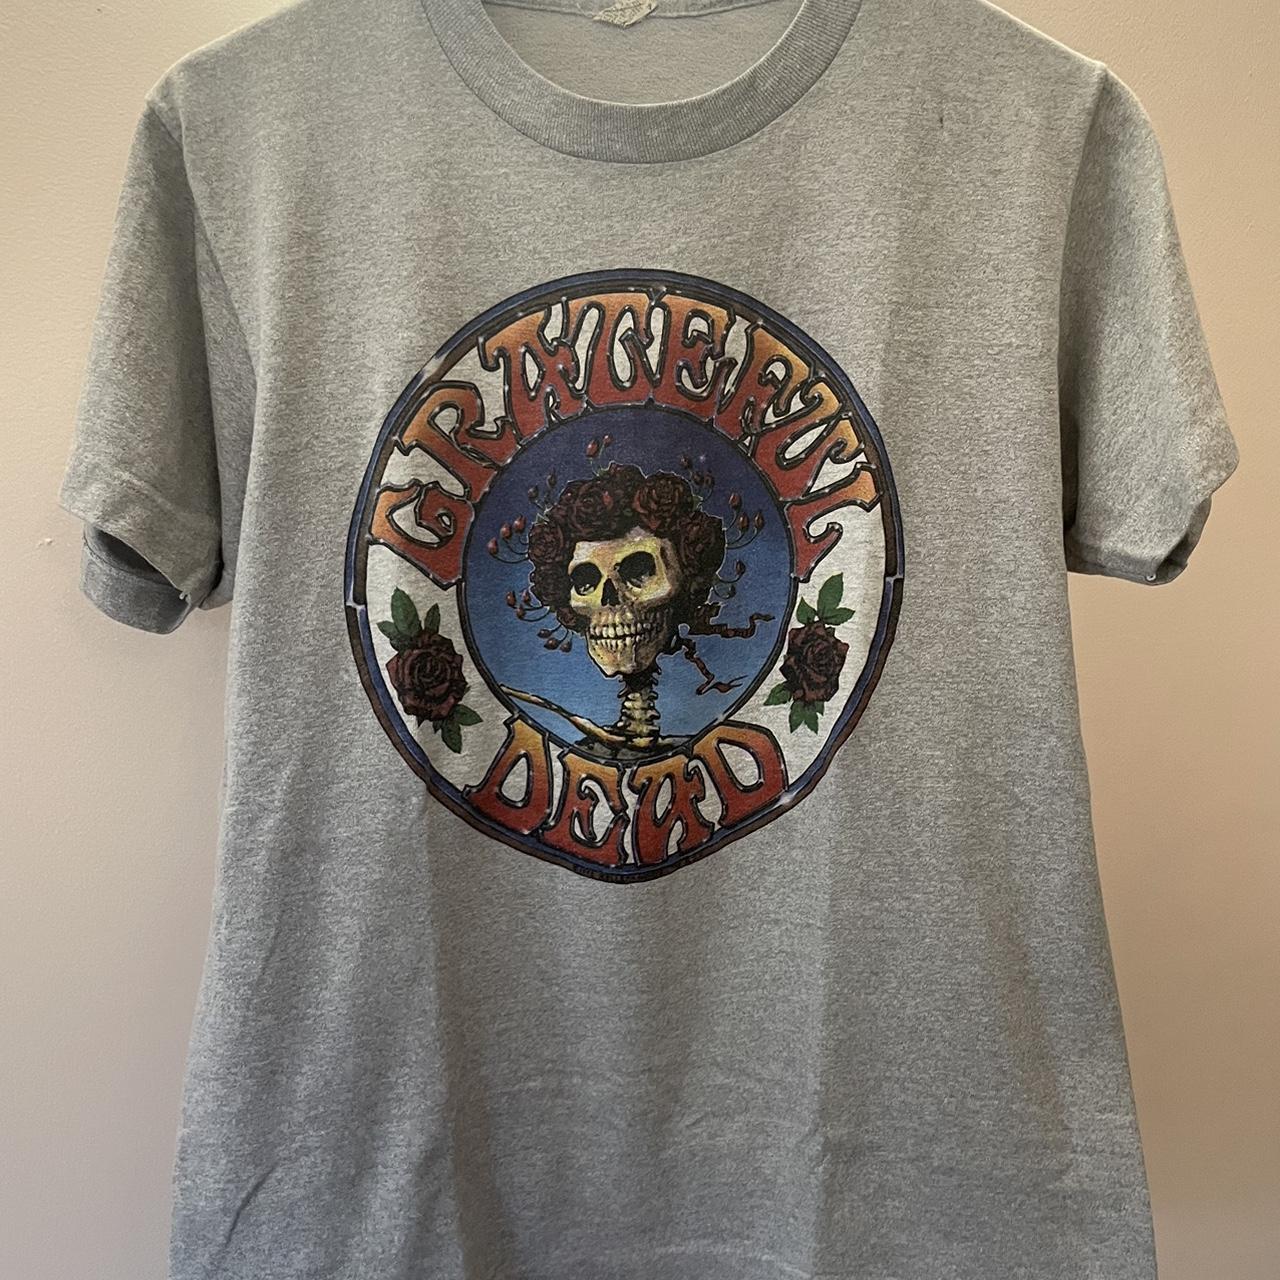 Giant Dead Head Steal Your Face T-shirt